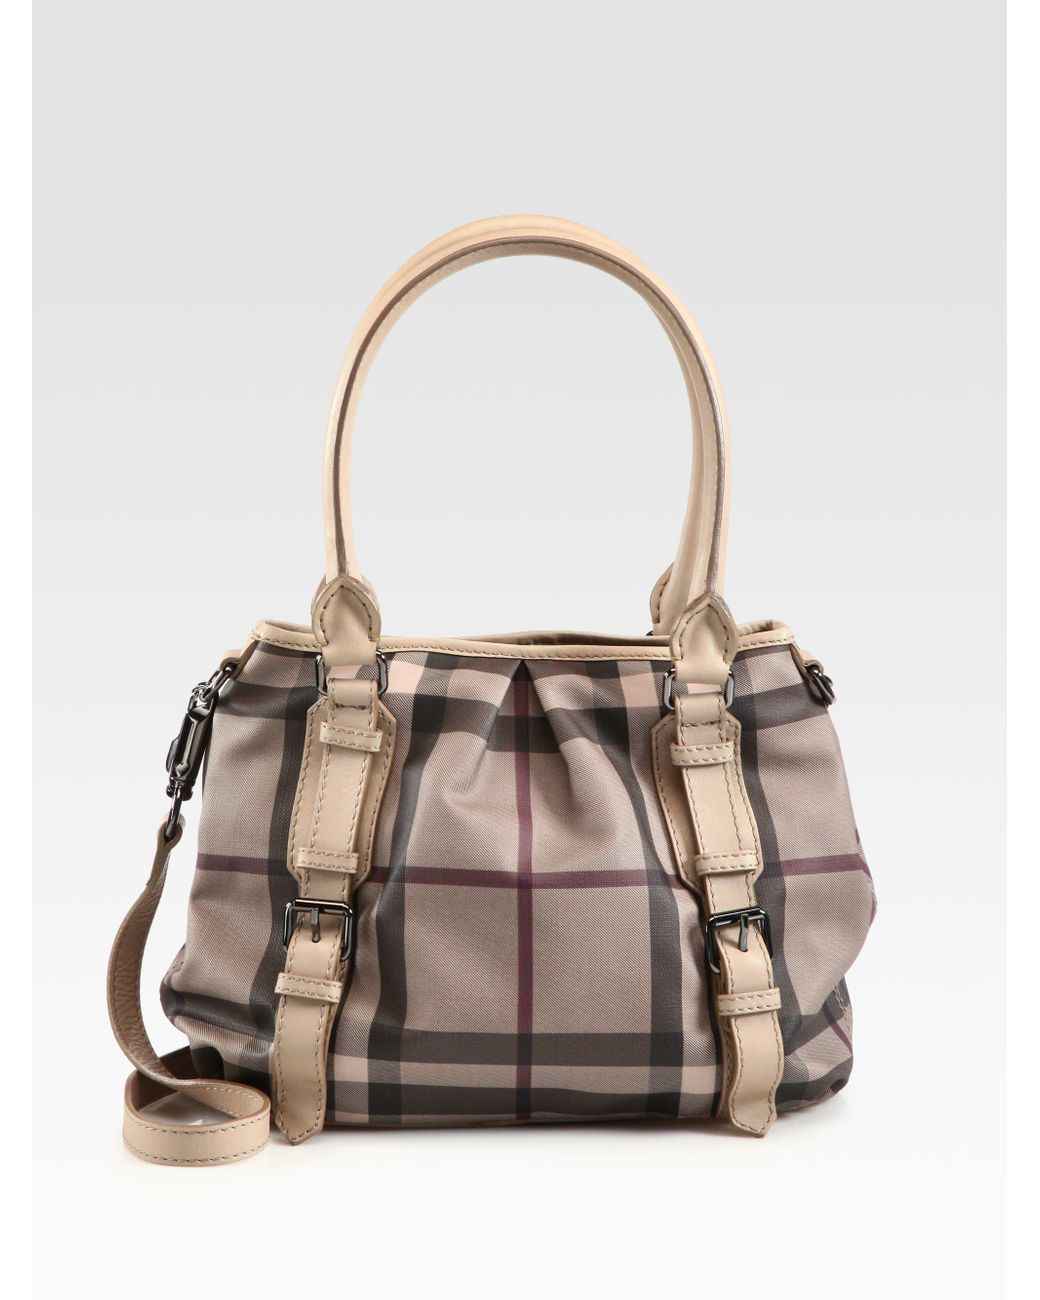 Burberry Smoke Check Leather Northfield Bag in Natural | Lyst